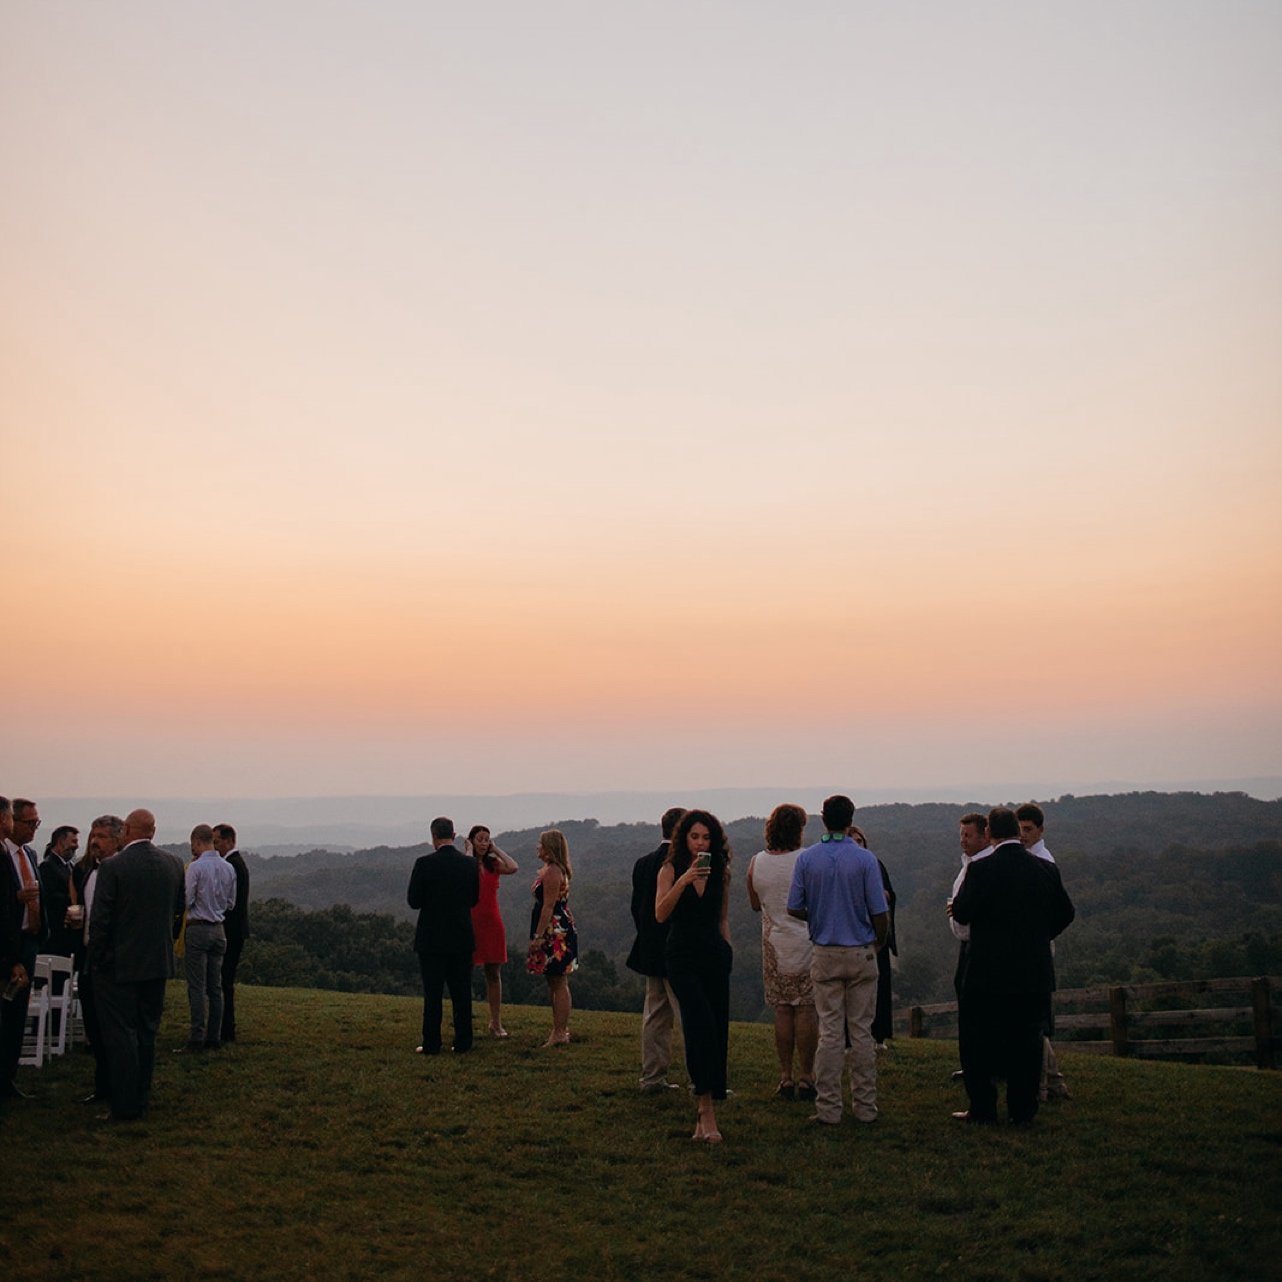 Guests enjoy the sunset over the hills at Howe Farms.